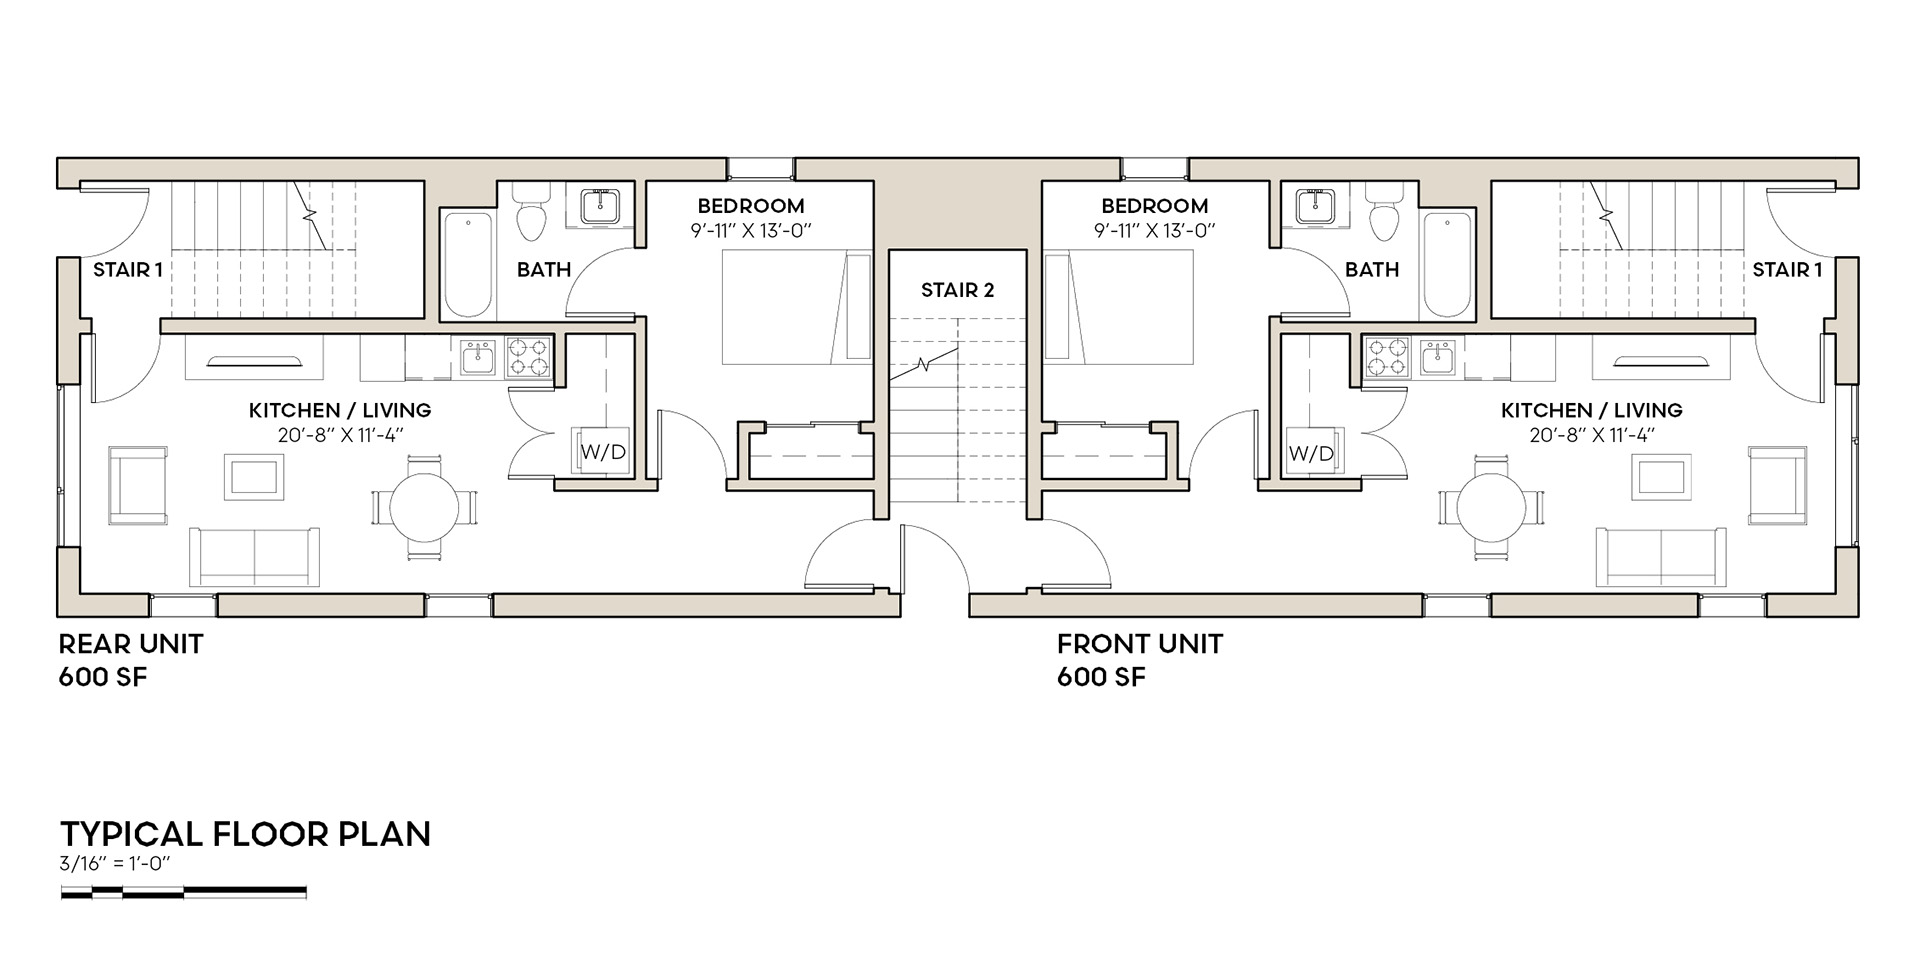 Floor plan for 8-flat Chicago housing showing two one-bedroom units
